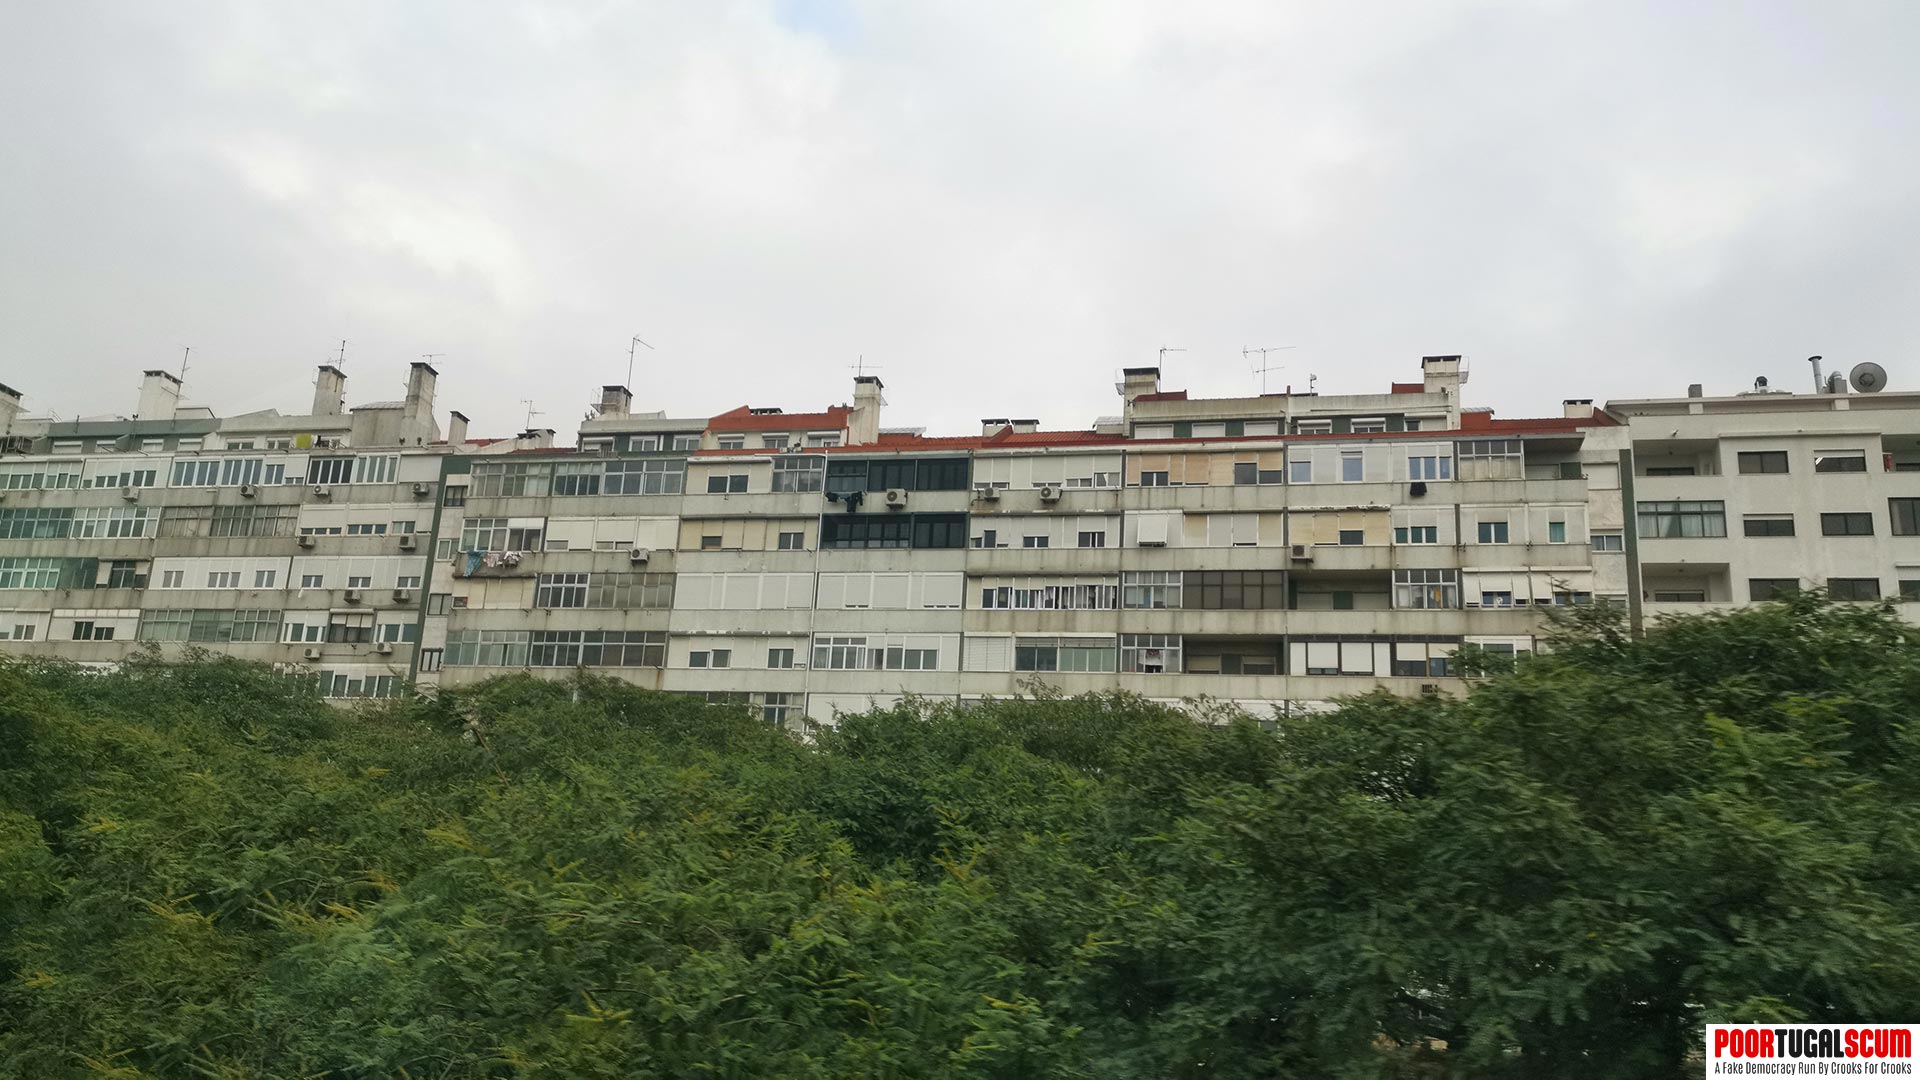 Several buildings side by side in the Portuguese suburbs